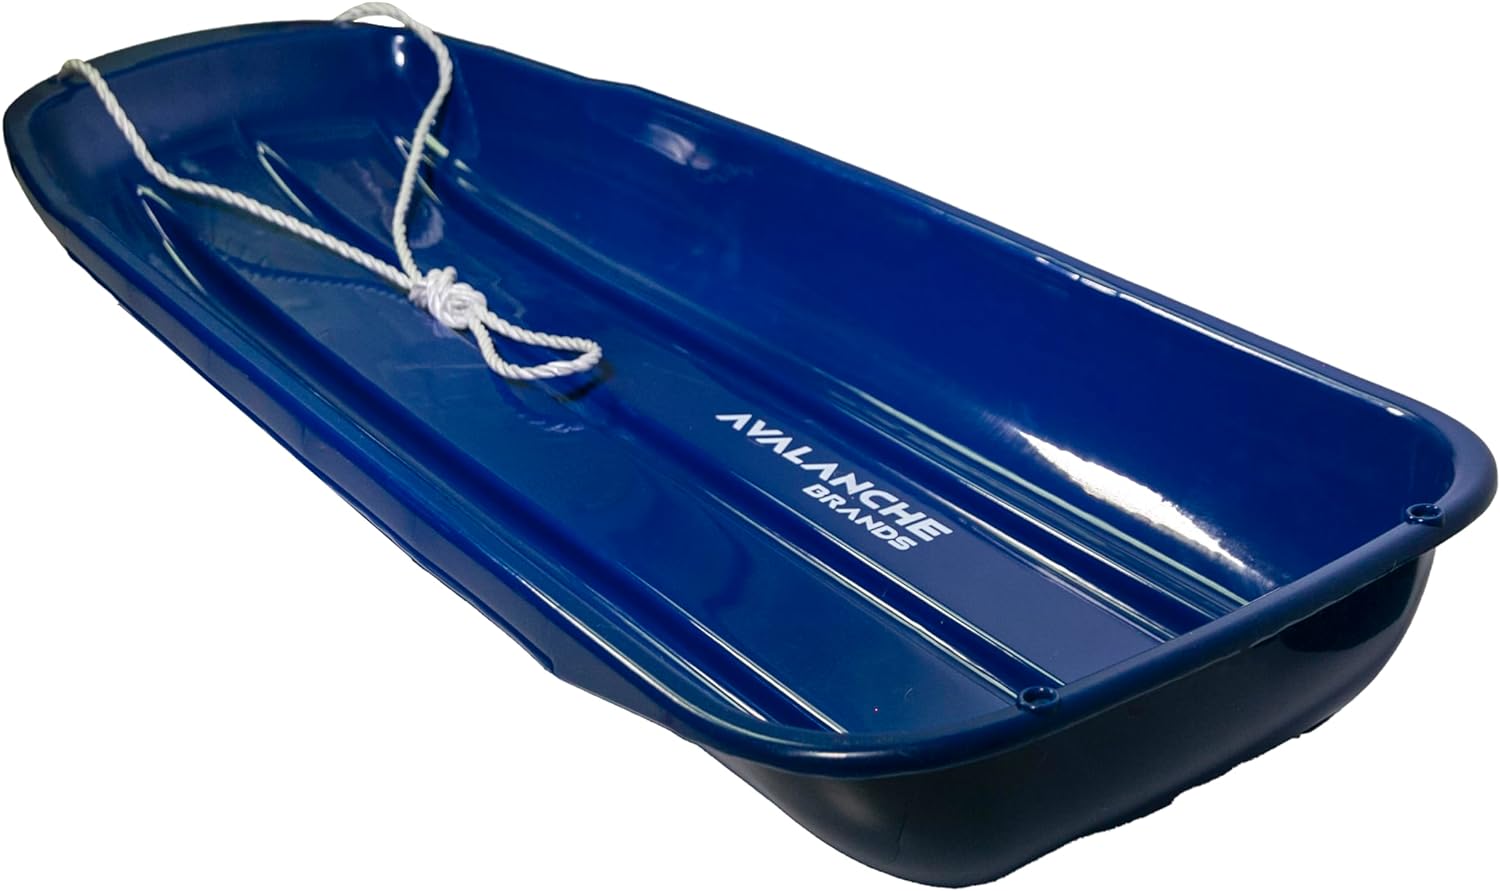 Classic 48" Downhill Toboggan Snow Sled Includes Pull Rope and Handles- Red, Blue, Black, or Pink